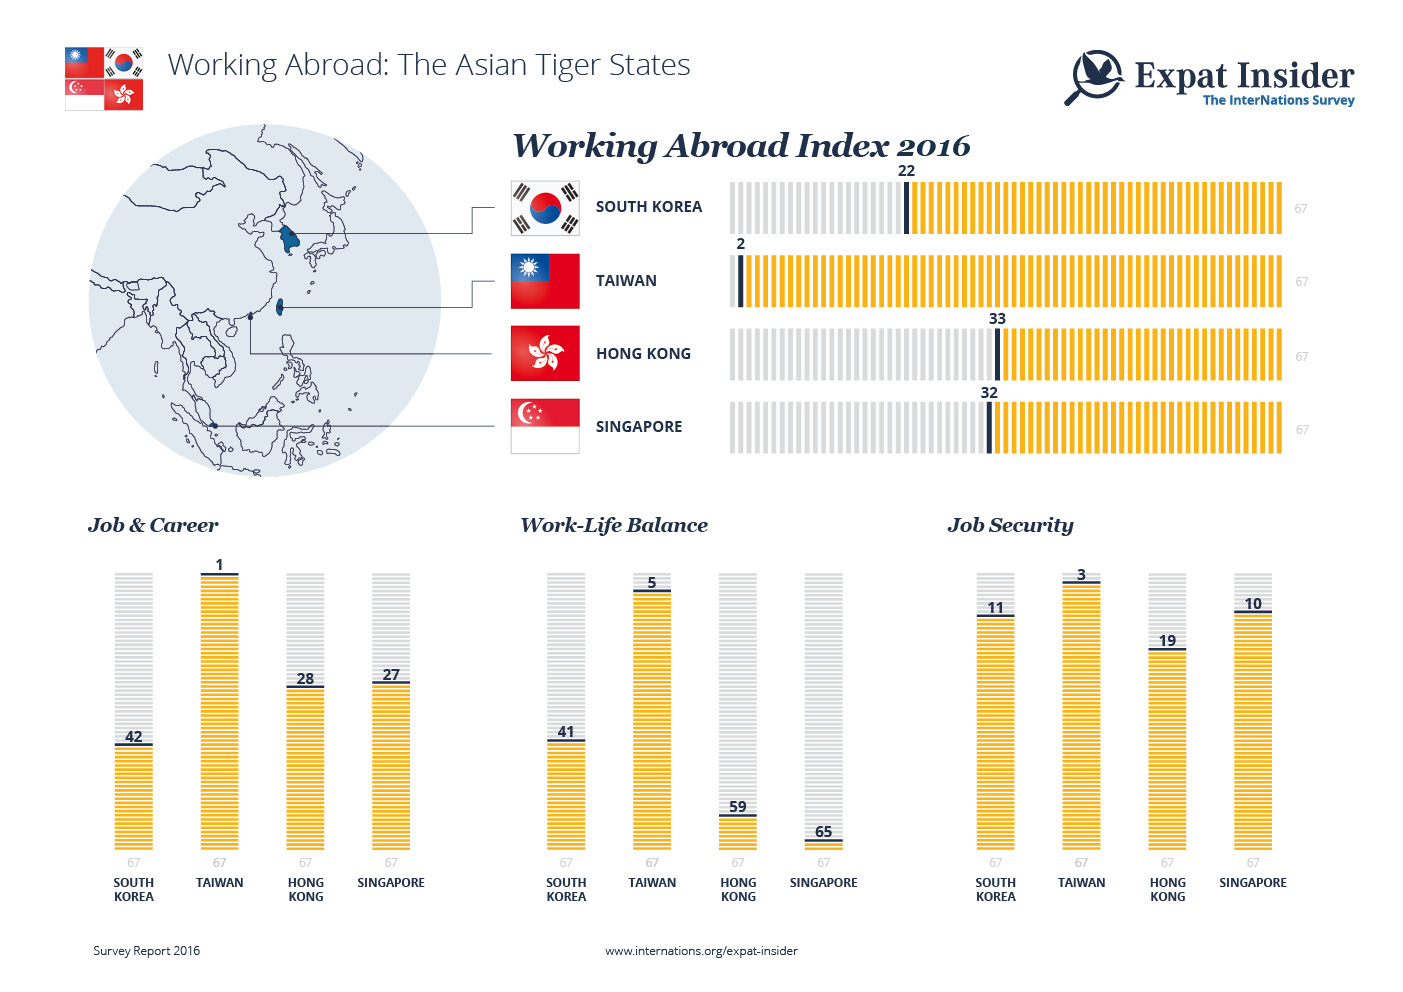 How Expats Rate Working in the Four Asian Tiger States — infographic